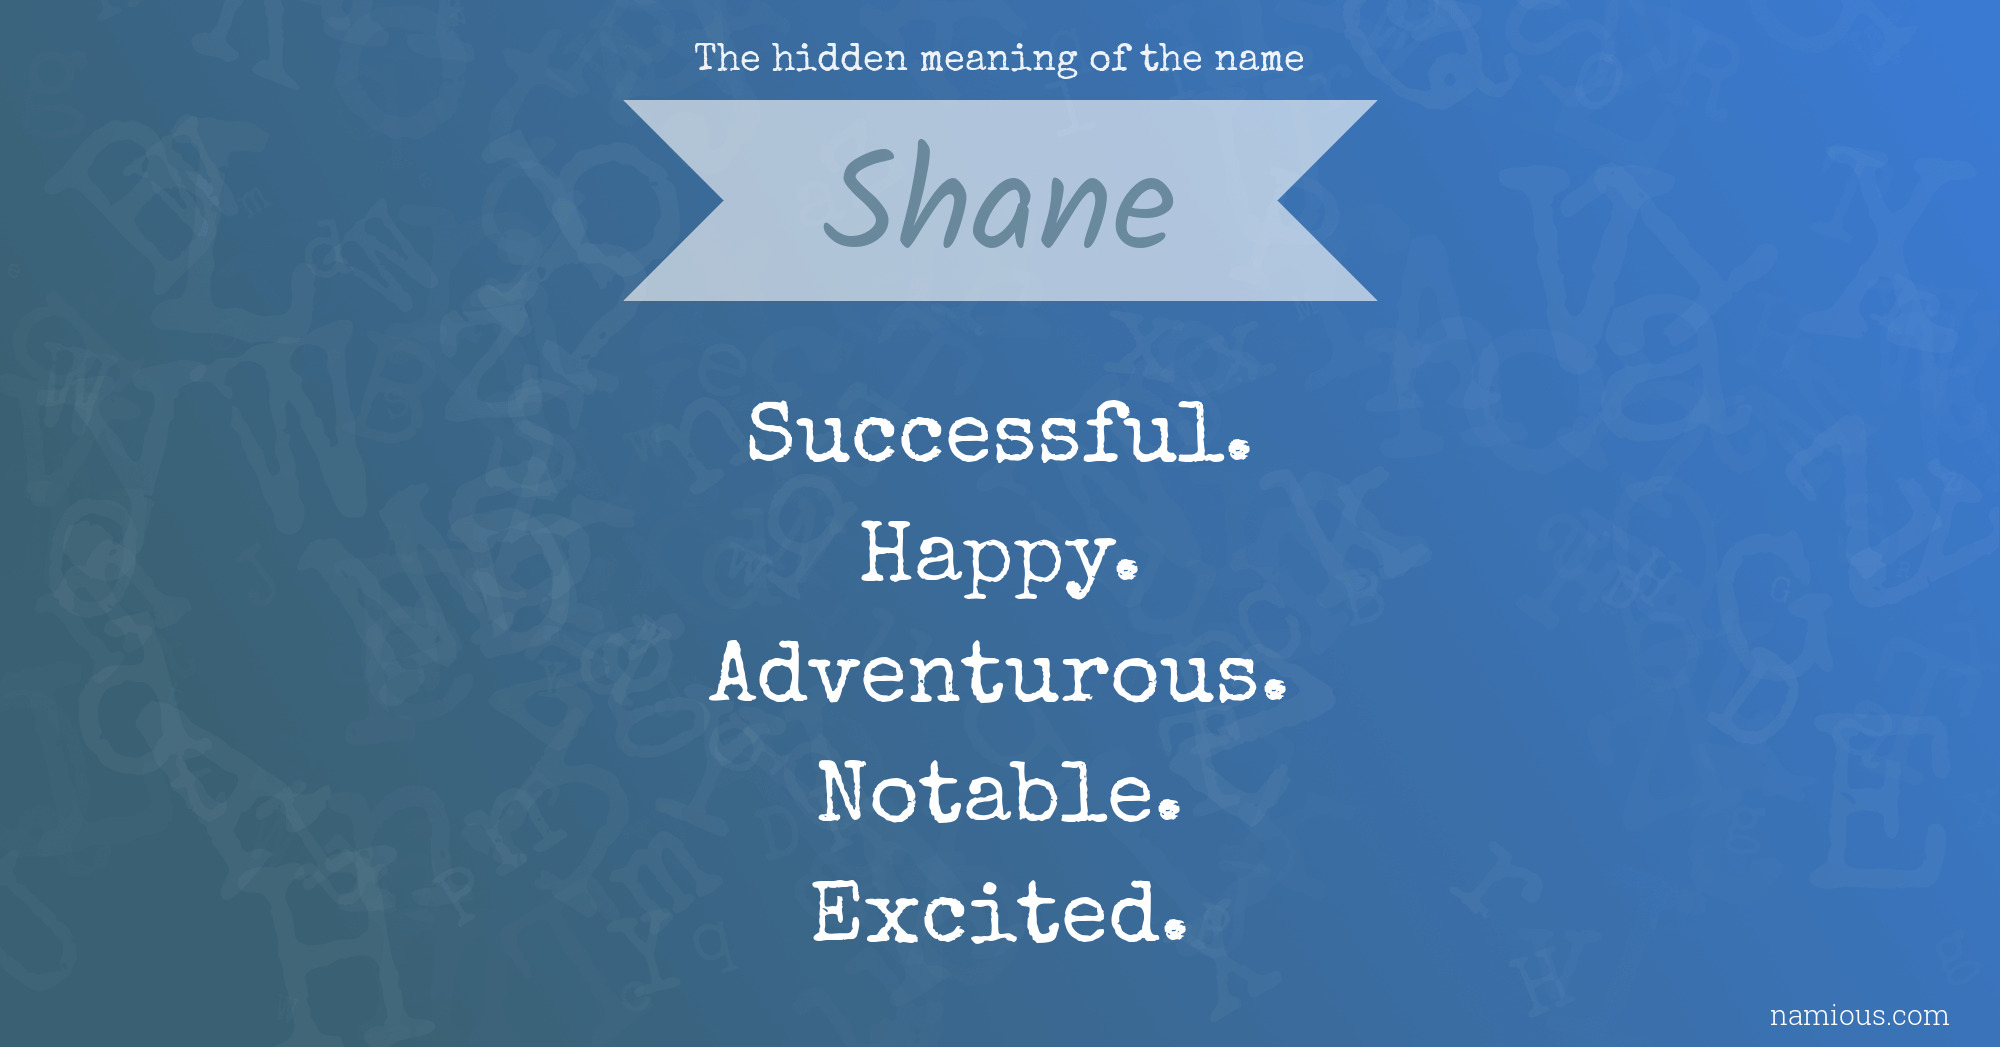 The hidden meaning of the name Shane